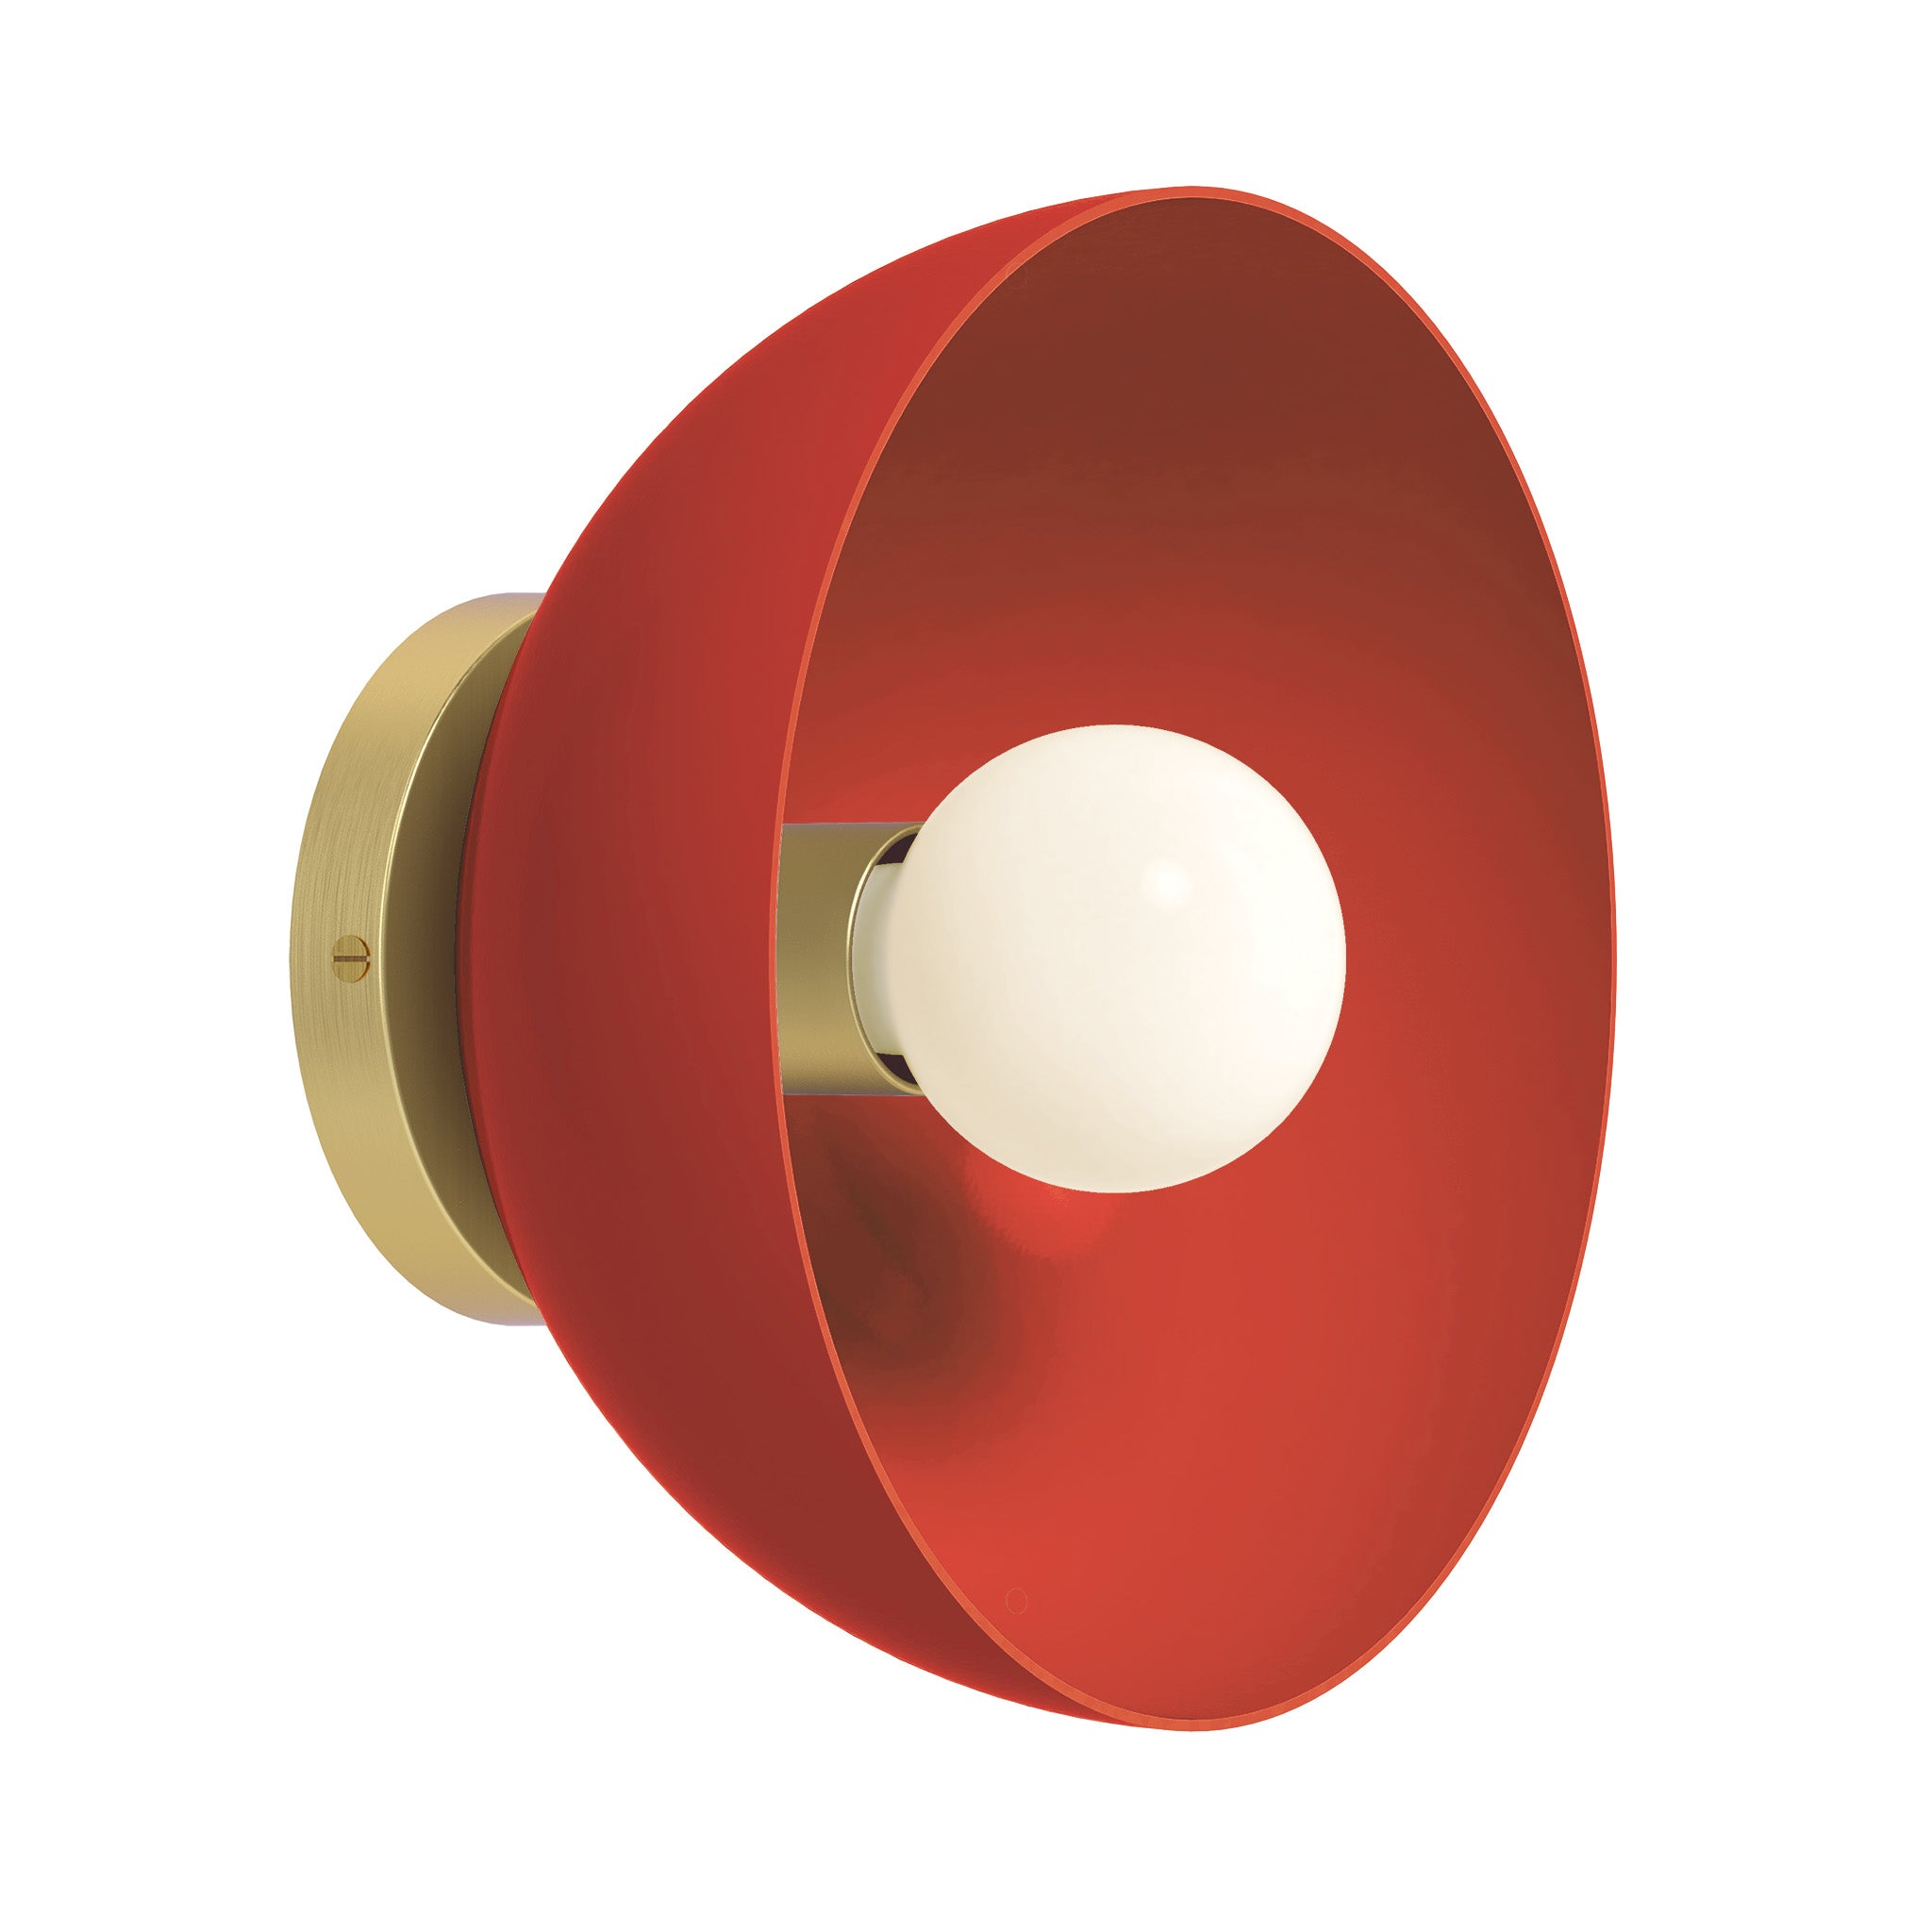 Brass and riding hood red color hemi dome sconce 10" Dutton Brown lighting